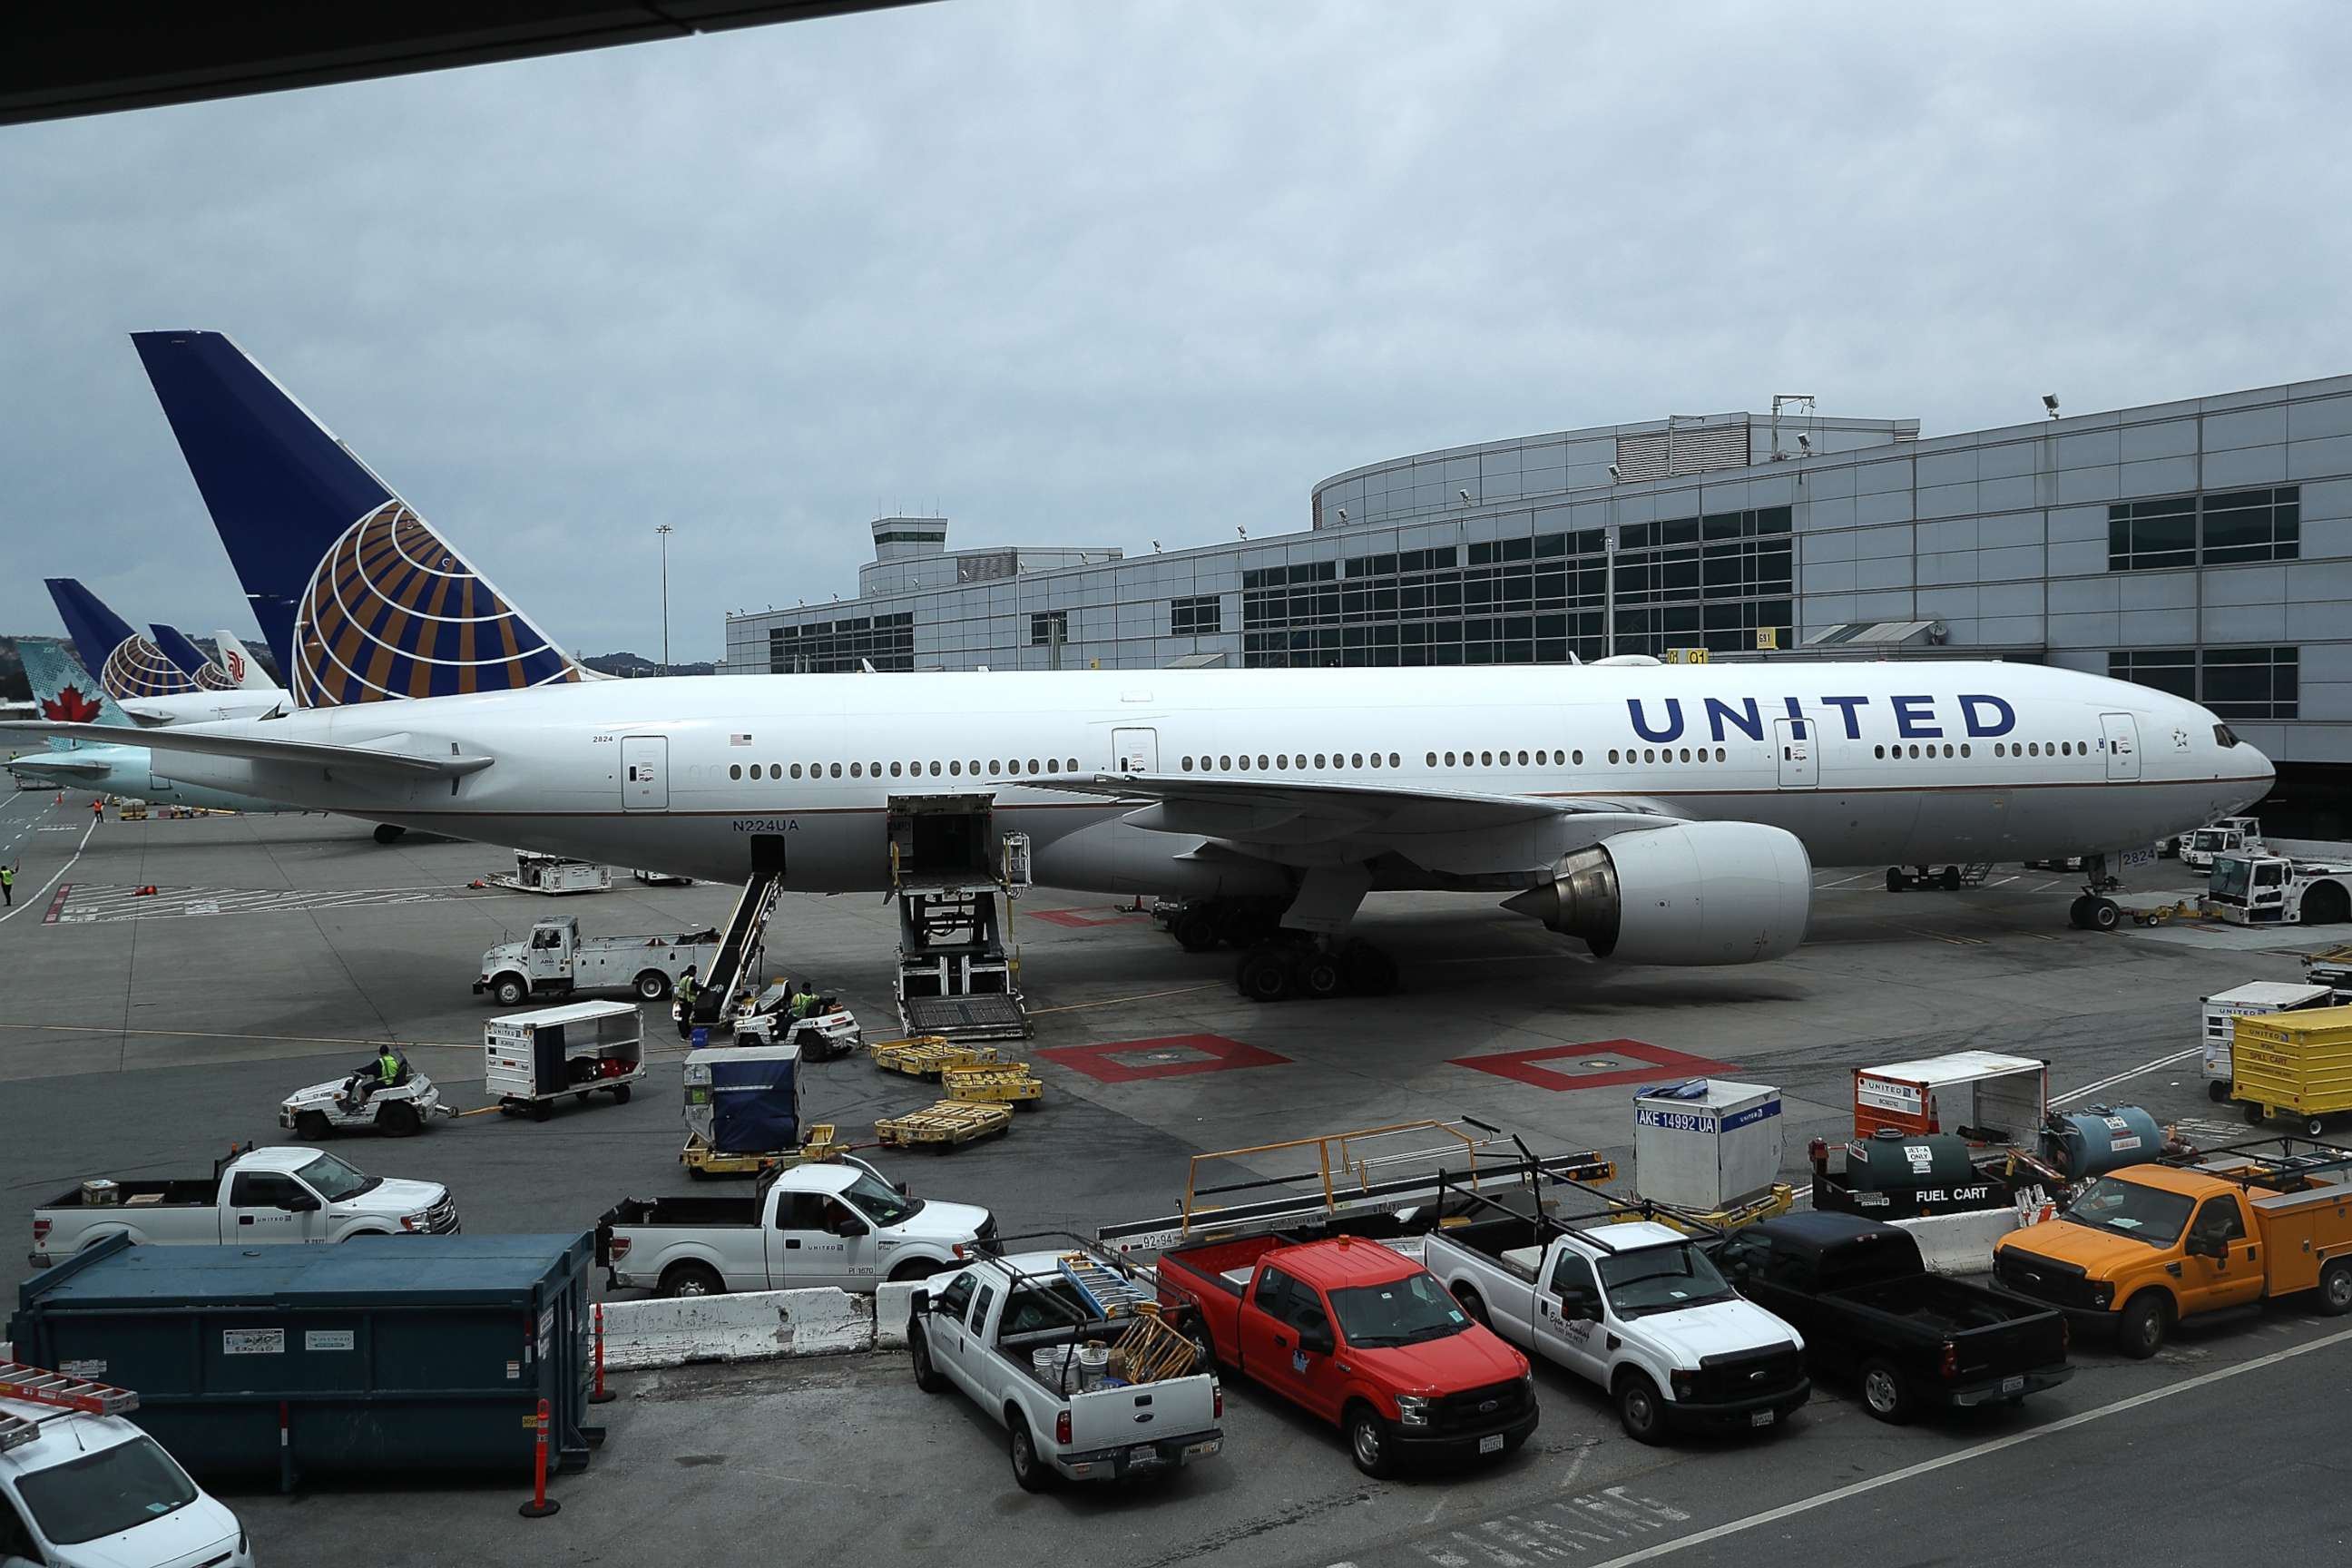 PHOTO: United Airlines planes sit on the tarmac at San Francisco International Airport, April 18, 2018 in San Francisco, in this file photo.